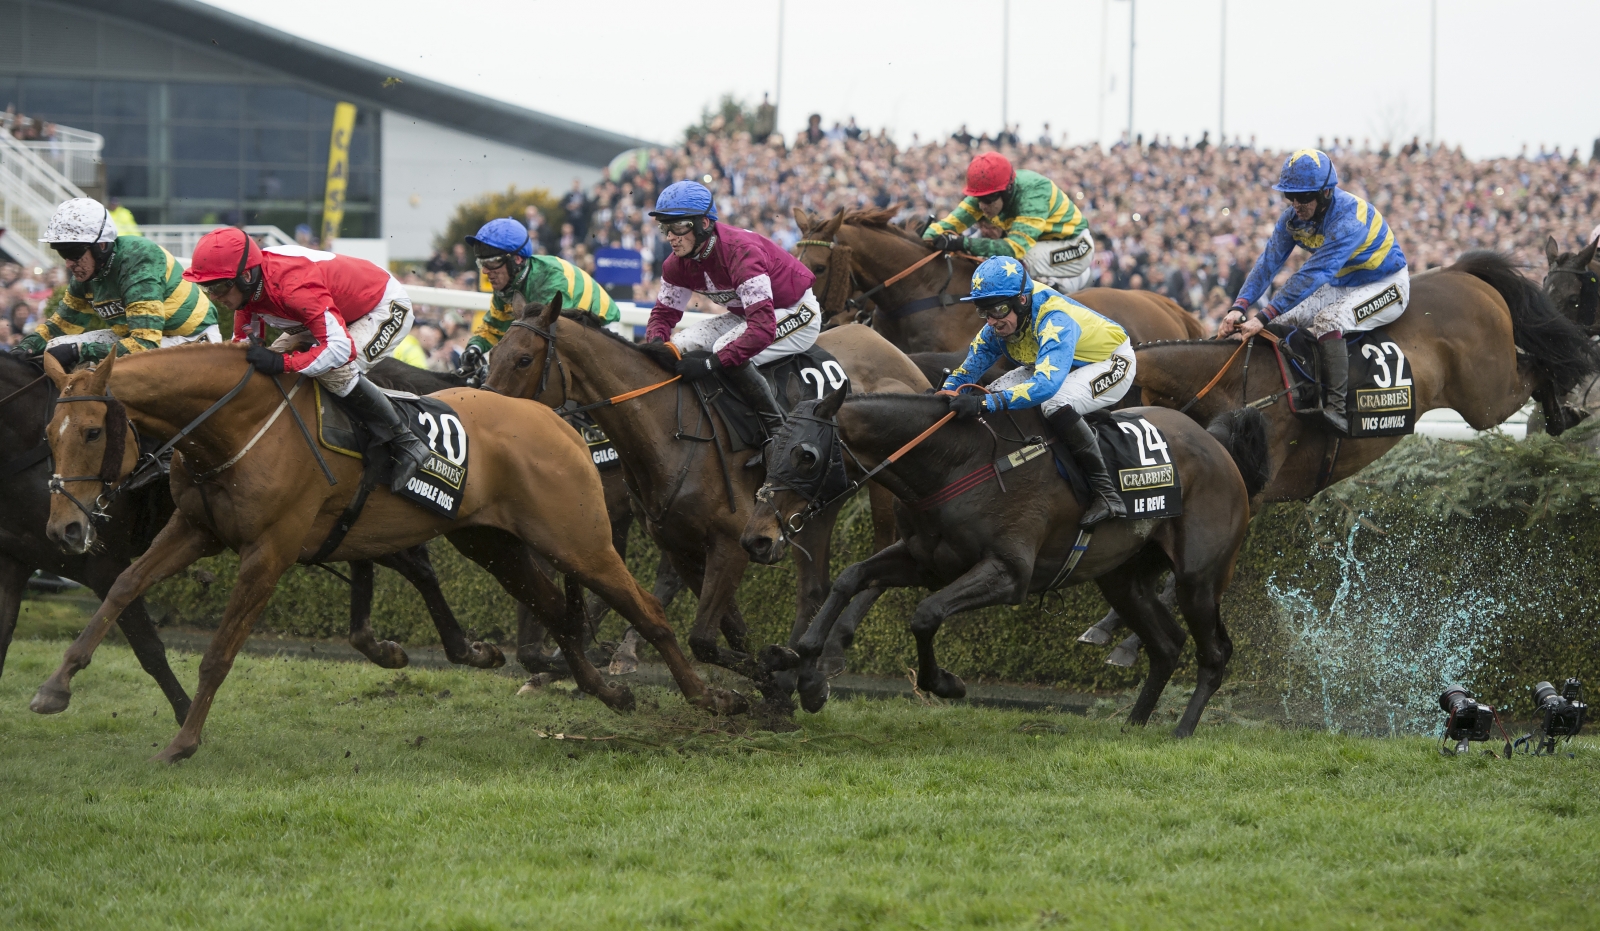 Grand National 2017: Preview and tips from Racing Post betting editor